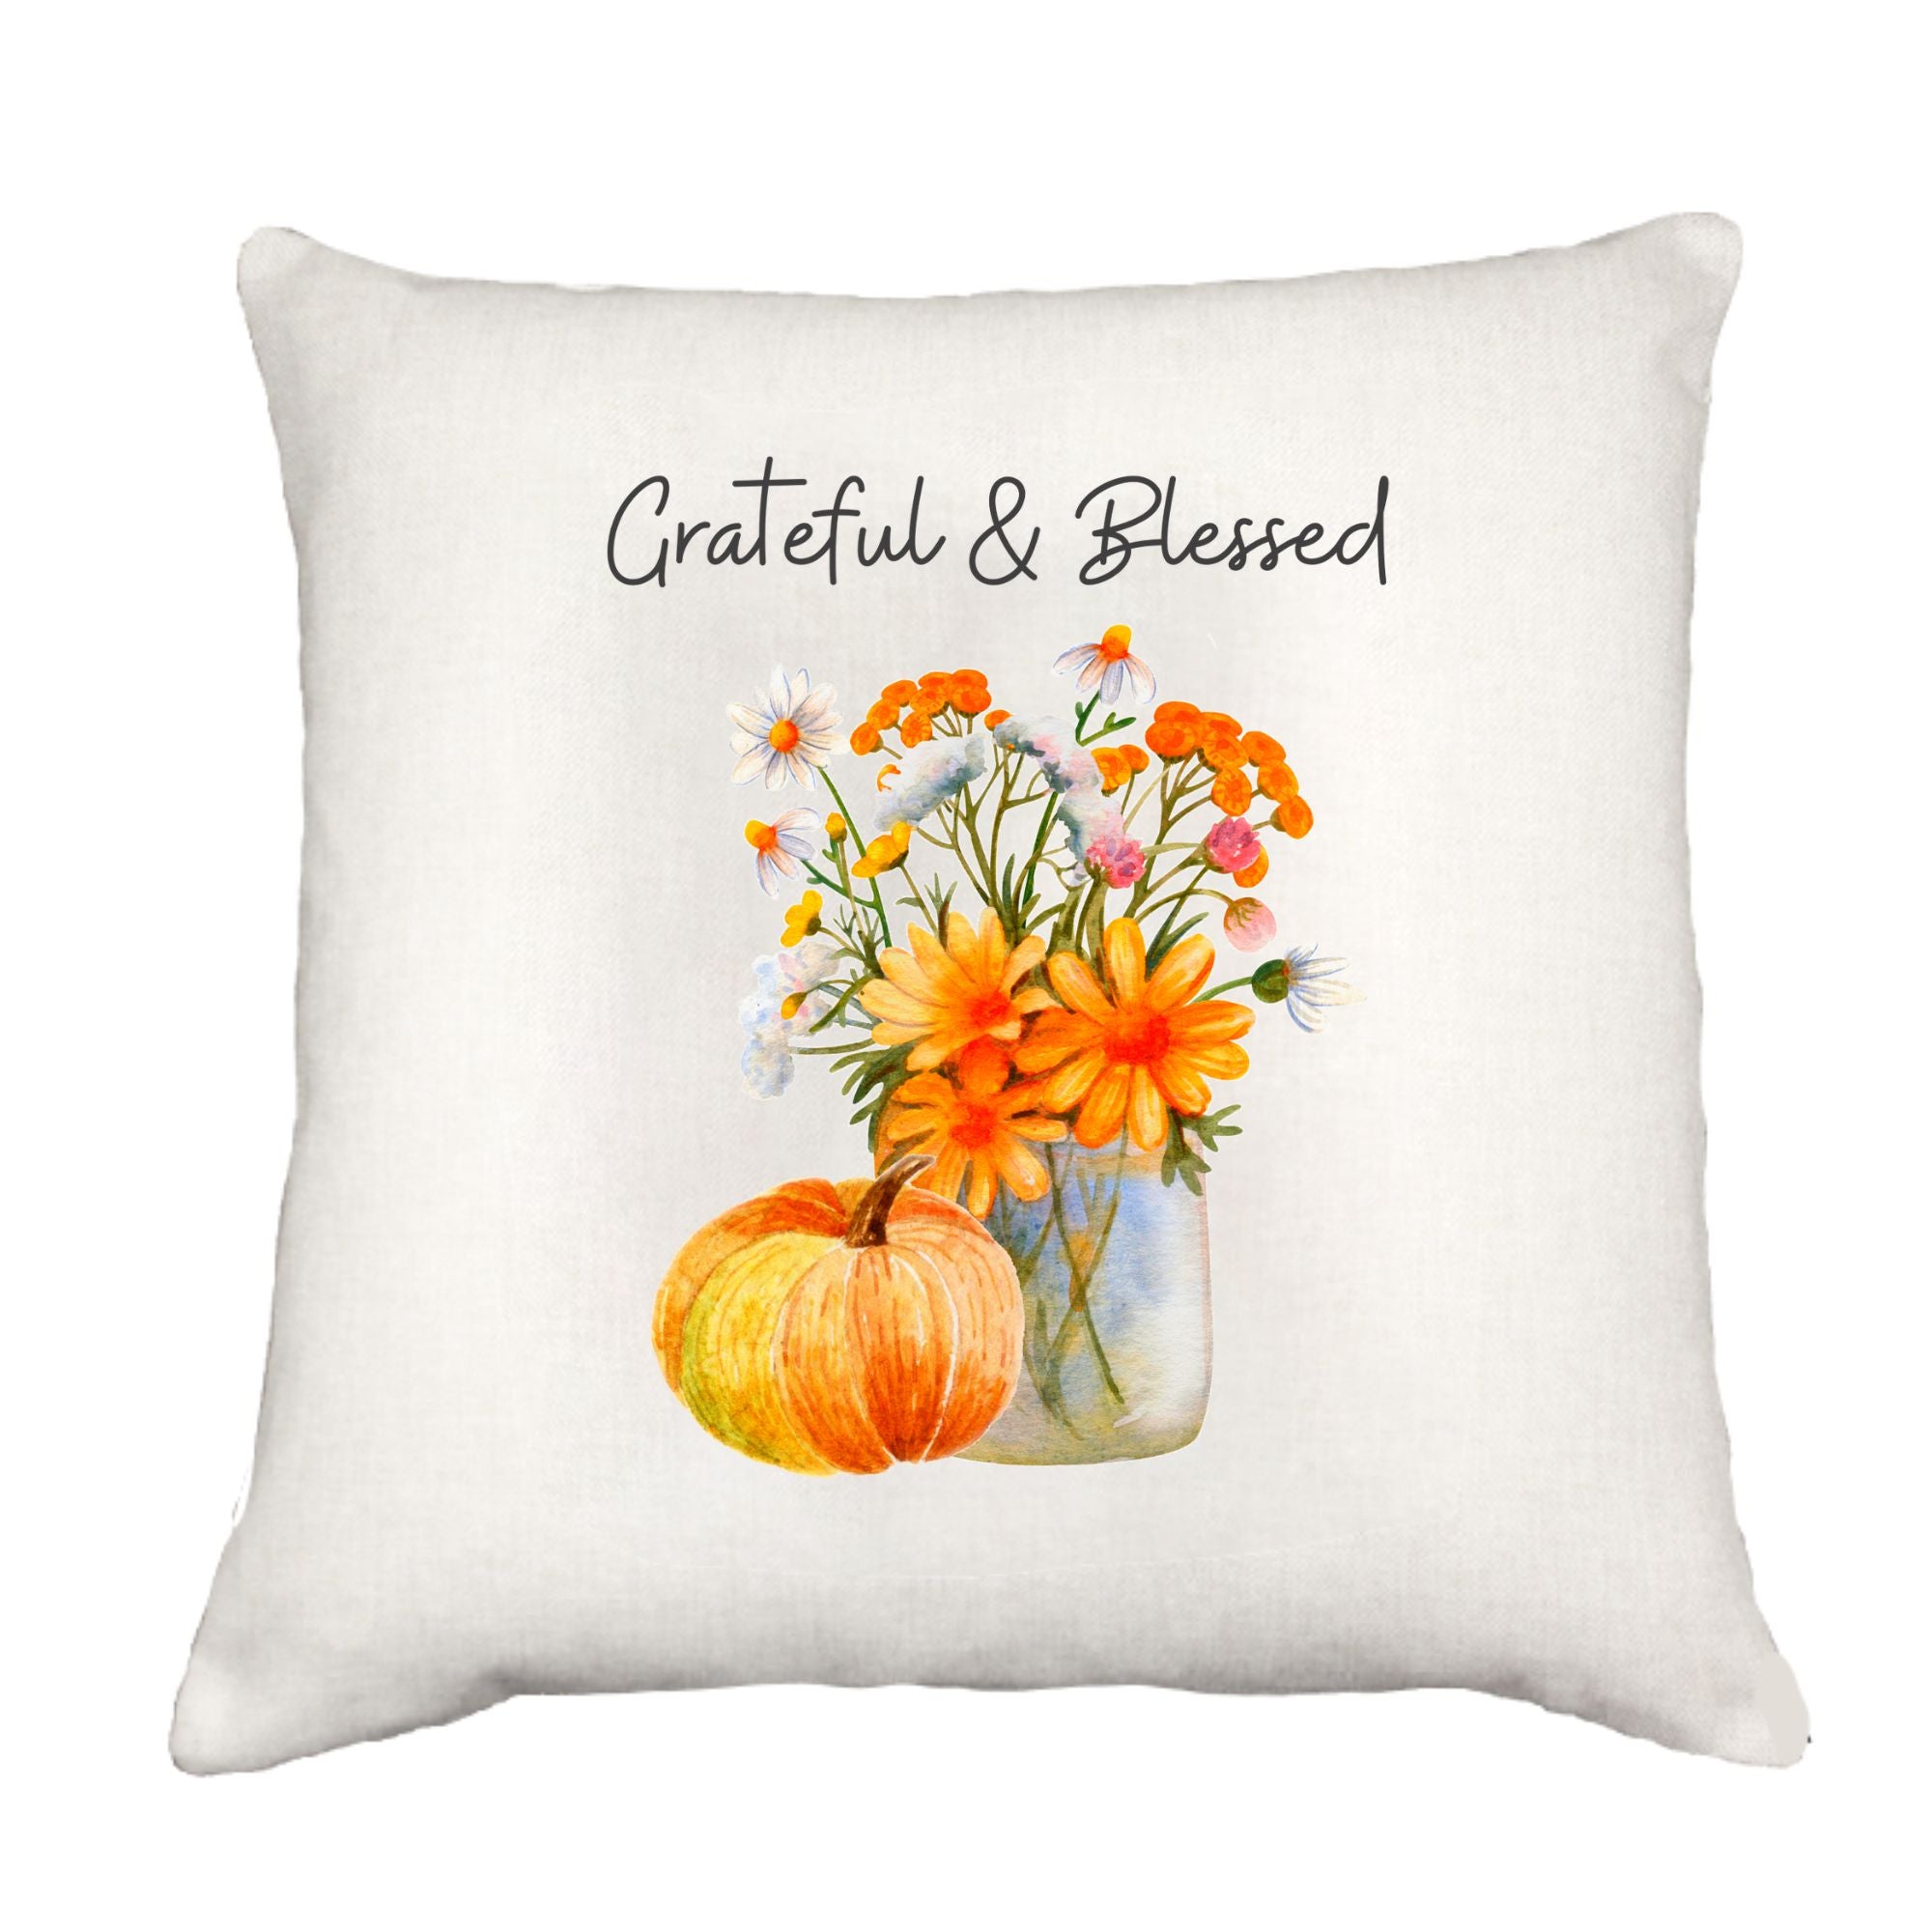 Grateful & Blessed Down Throw Pillow